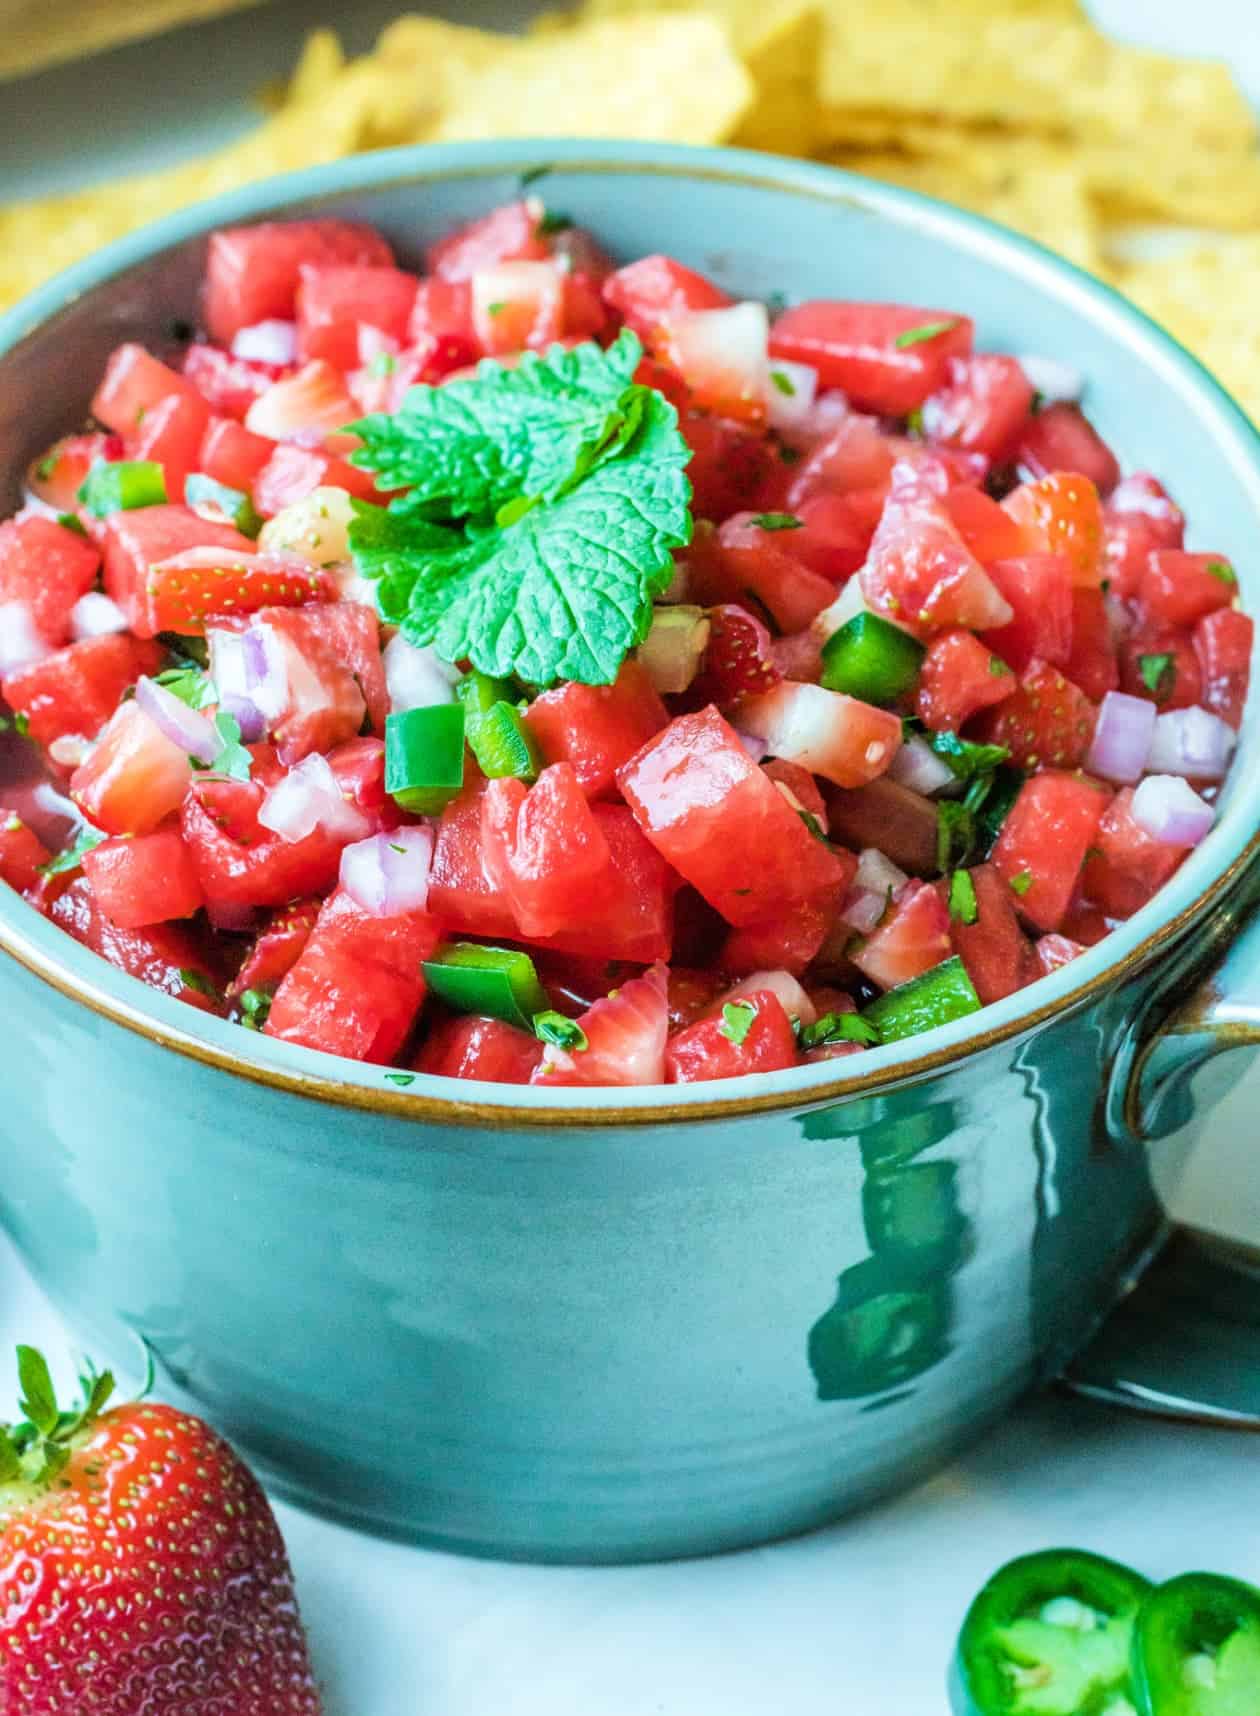 Watermelon salsa in a small teal bowl with a handle.